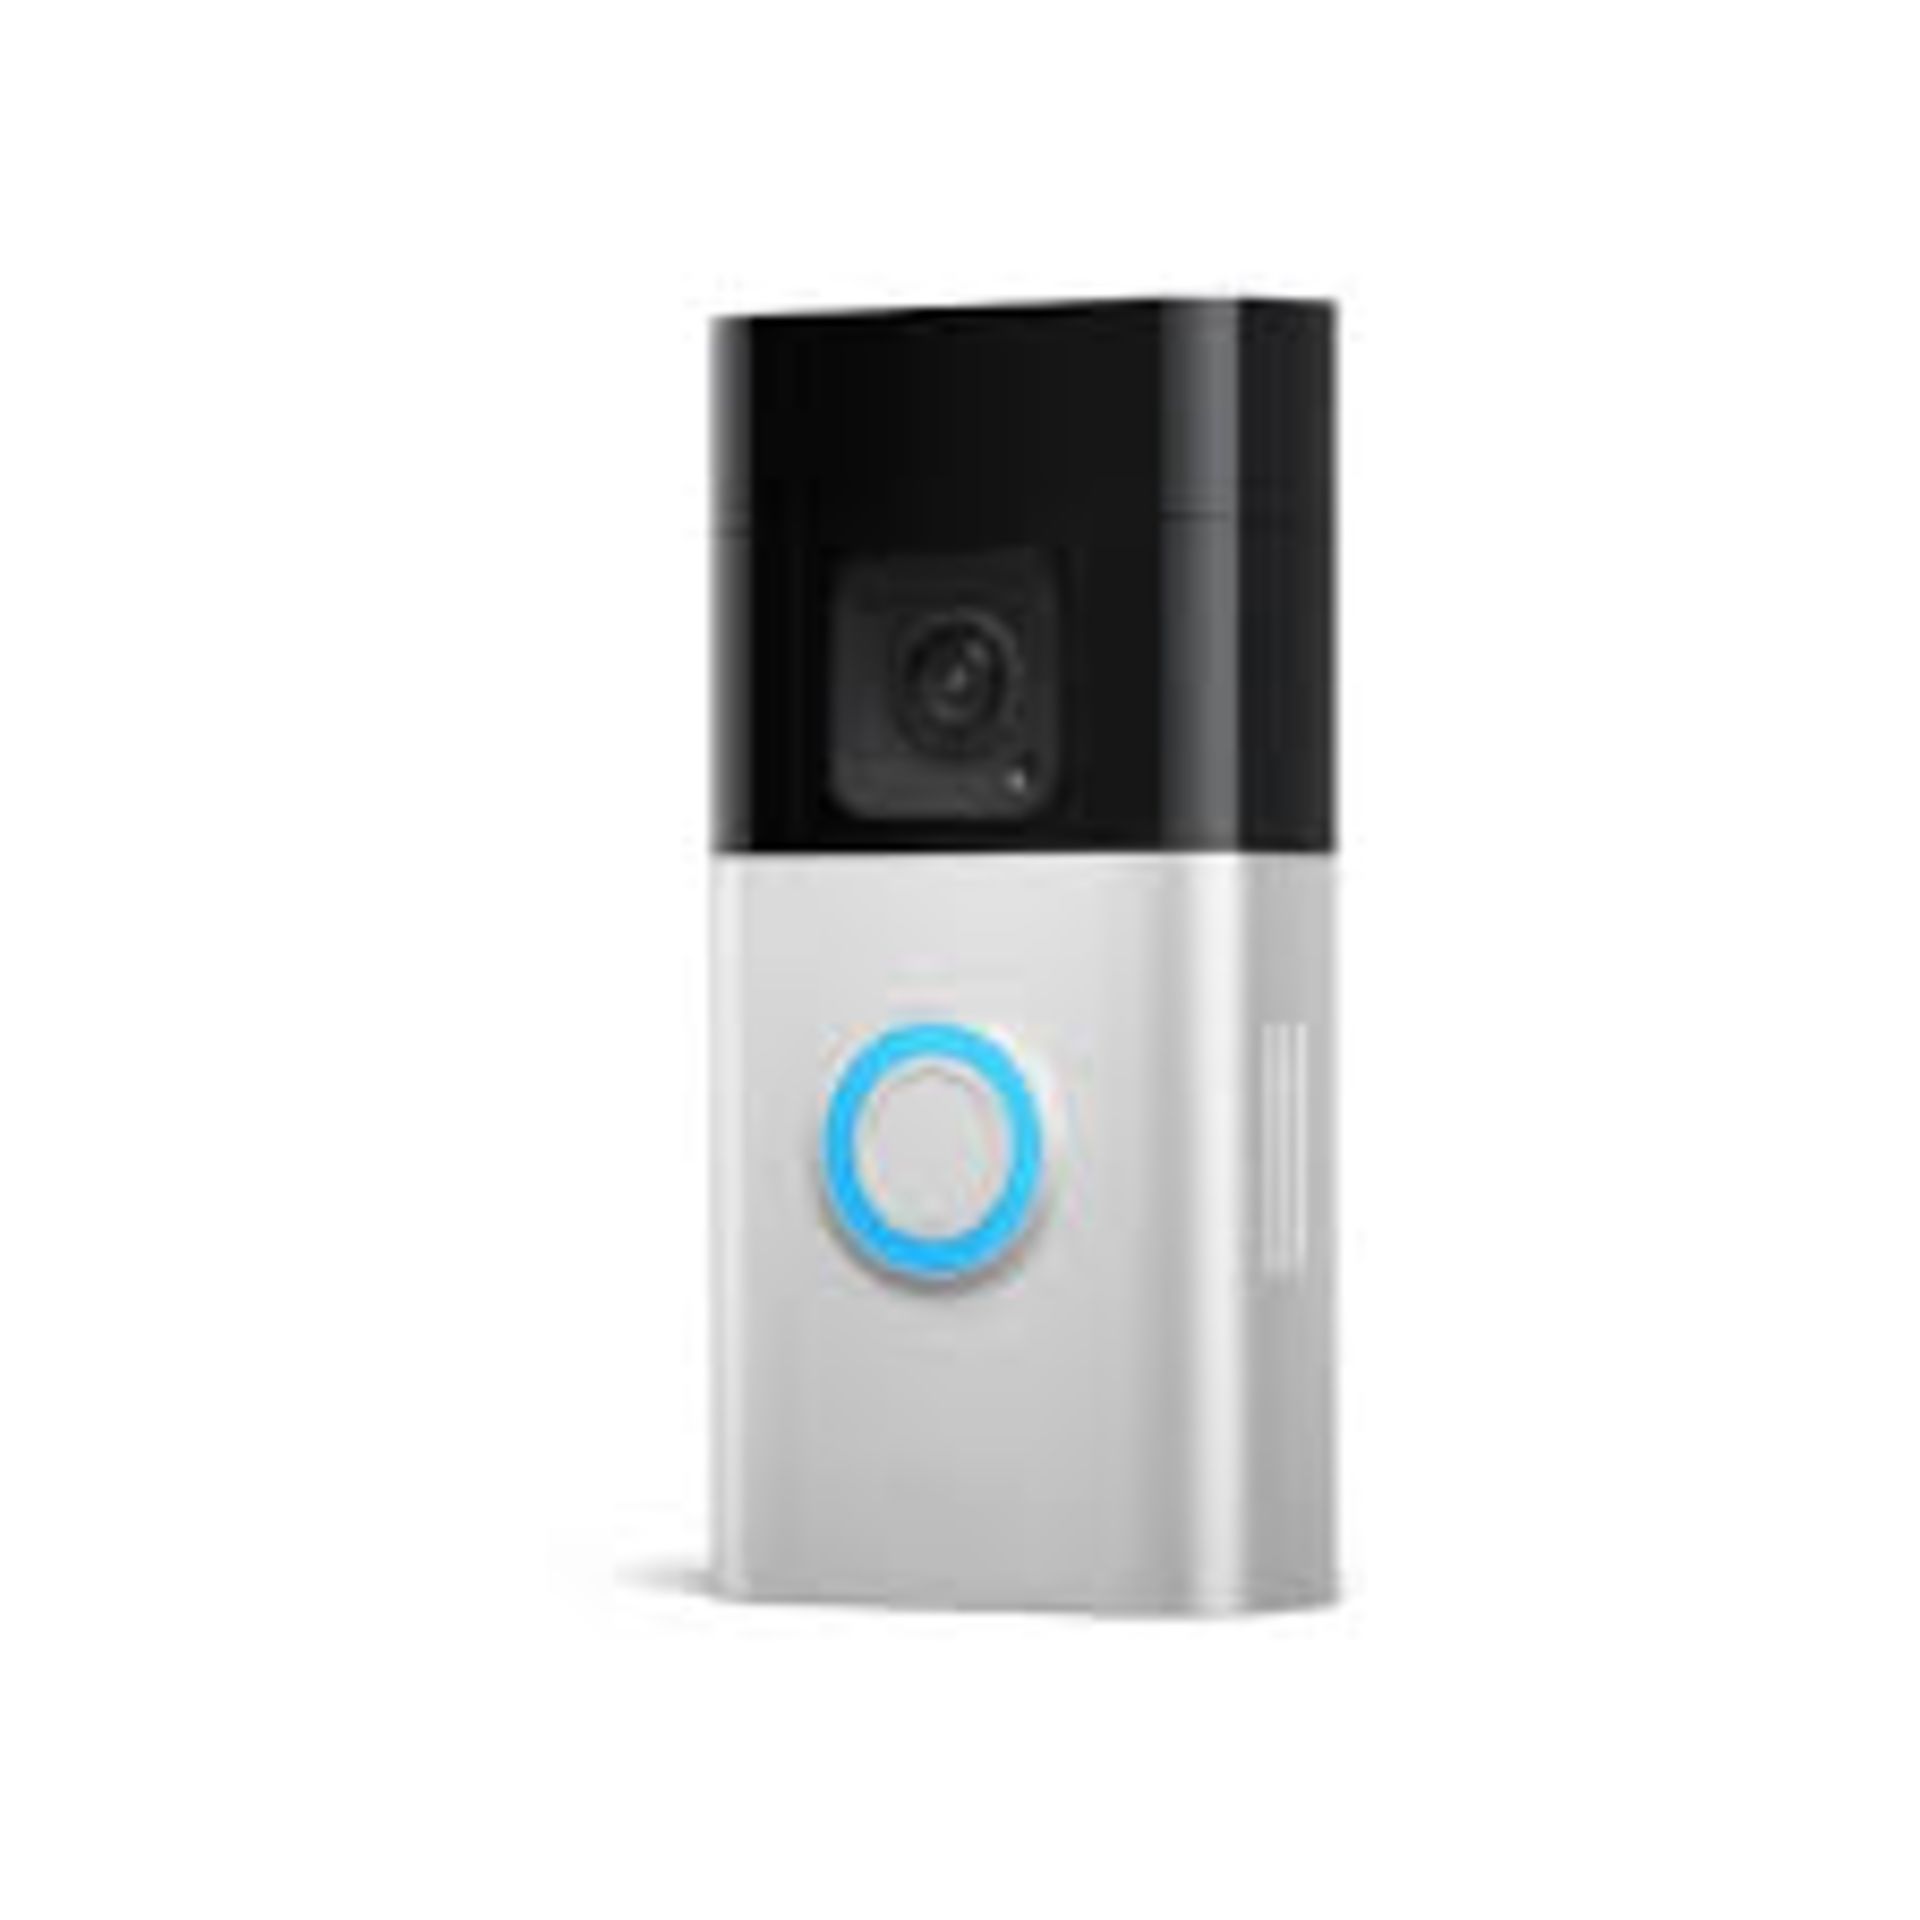 3 x Ring Battery Video Doorbell Plus. - PW. The Ring Battery Doorbell Plus is a wireless smart